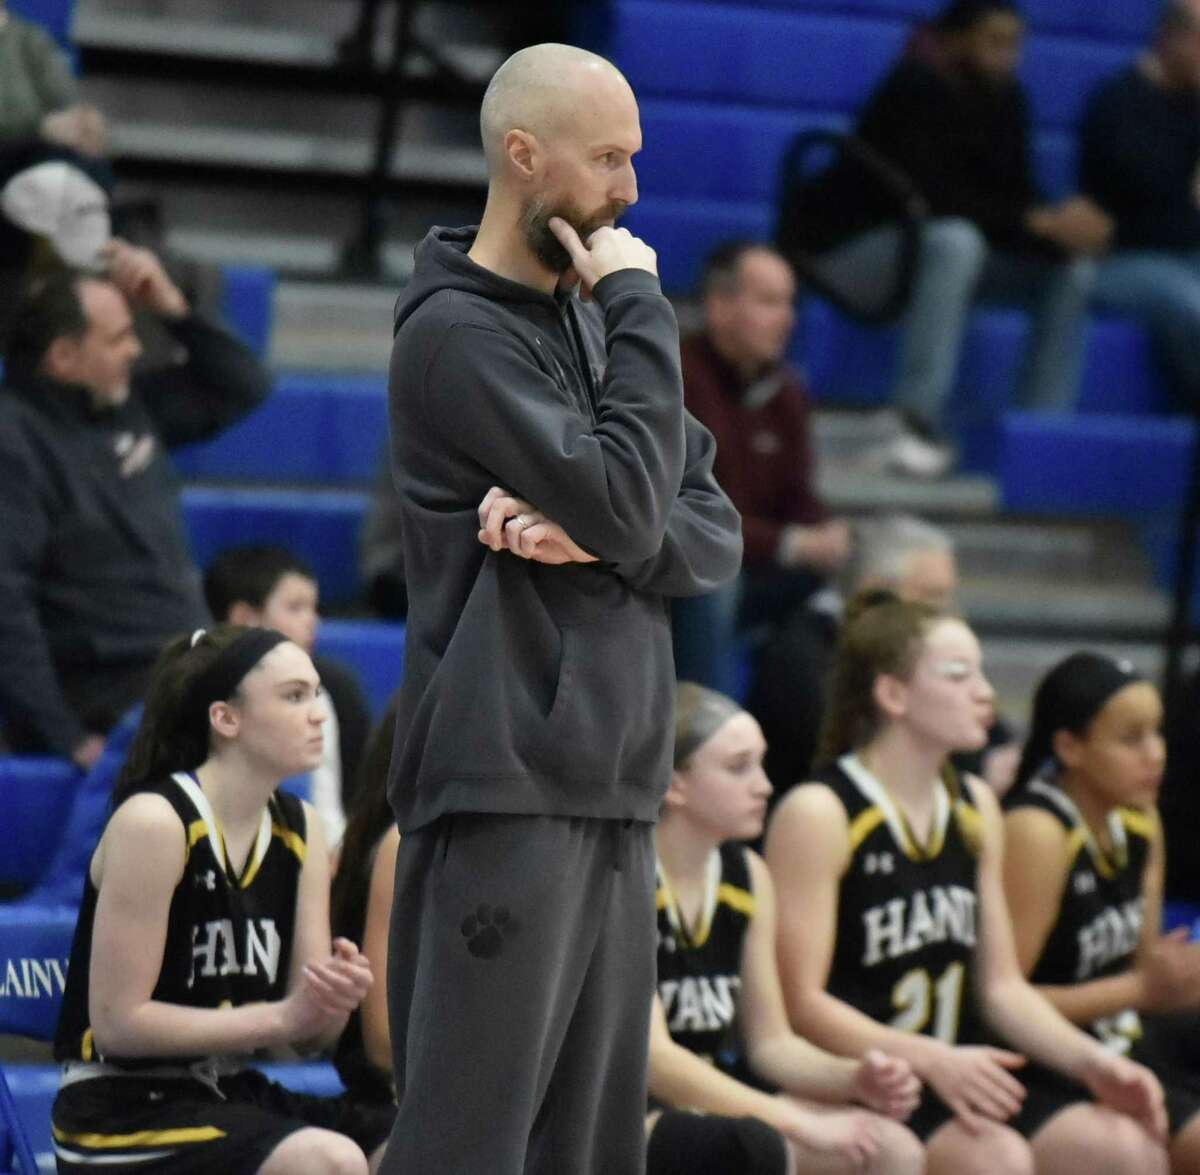 Coach Tim Treadwell and the Hand girls basketball team will face fellow SCC foe Hillhouse in the Class L championship game on Saturday.